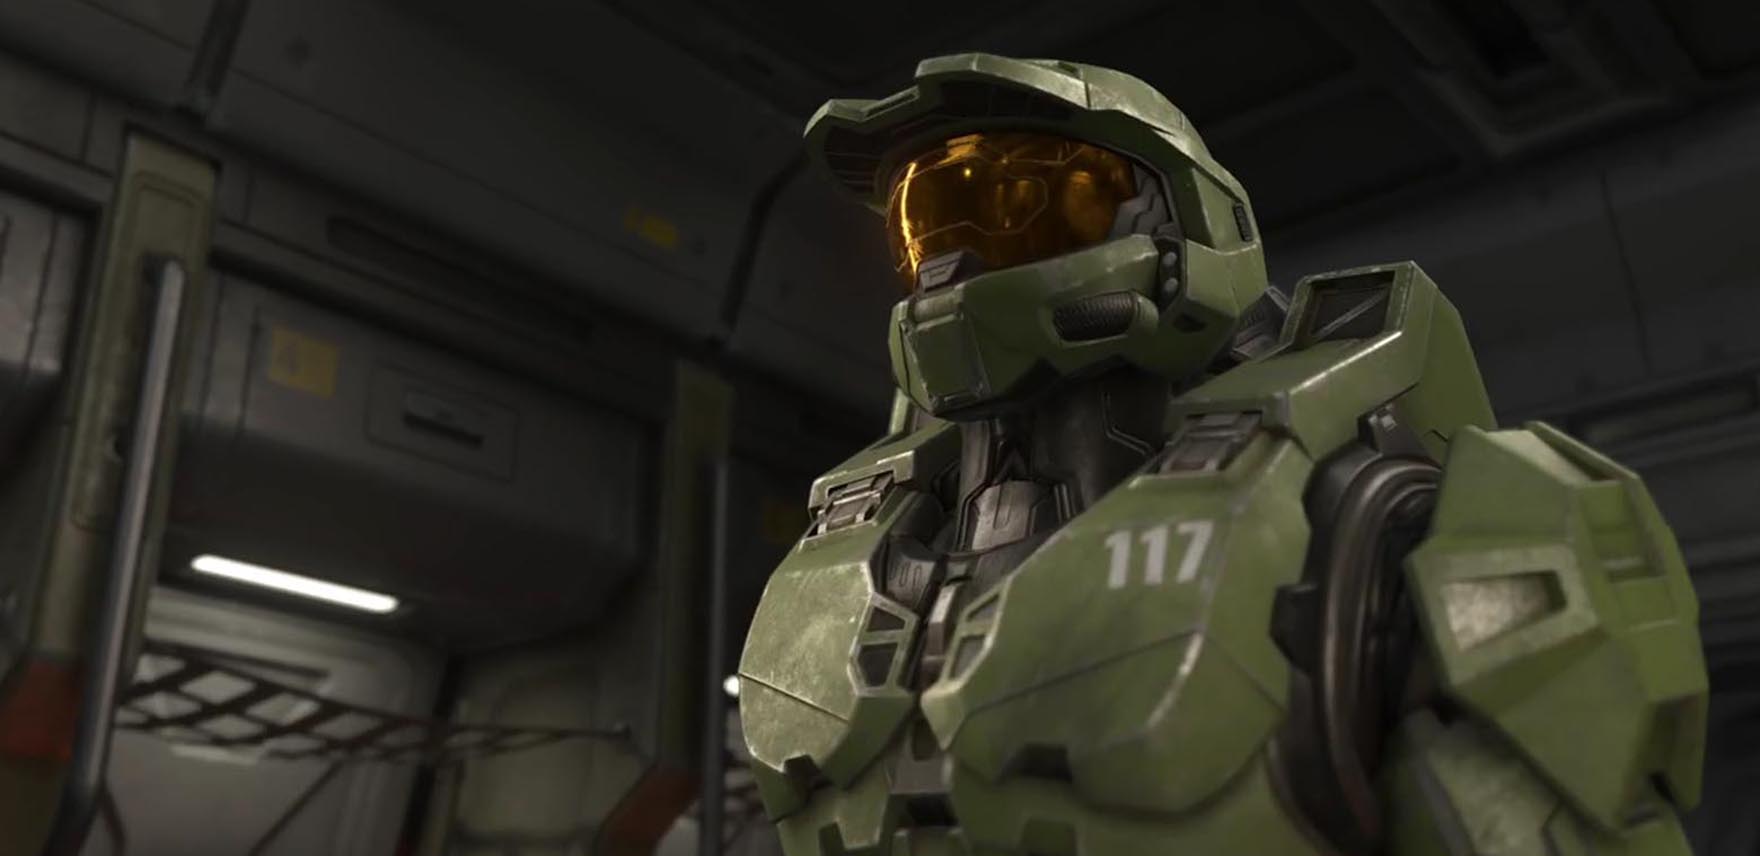 Master Chief from the Halo series